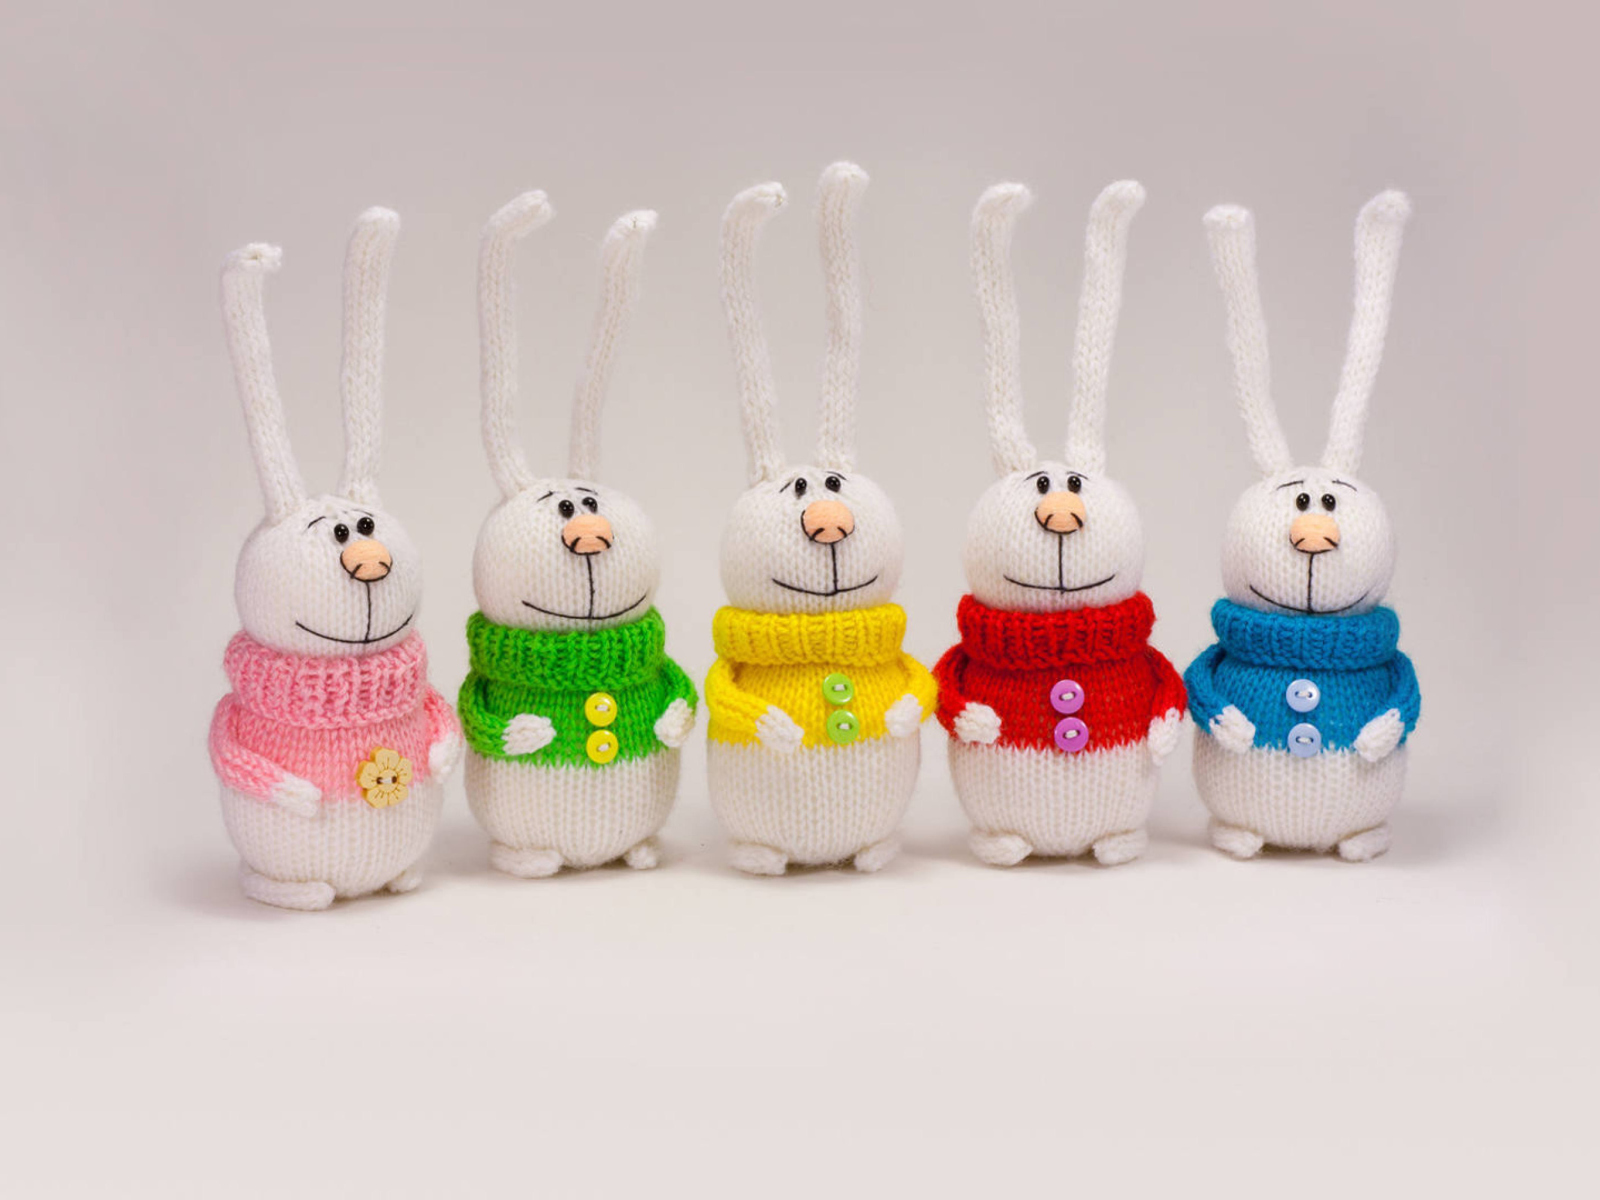 Knitted Bunnies In Colorful Sweaters wallpaper 1600x1200